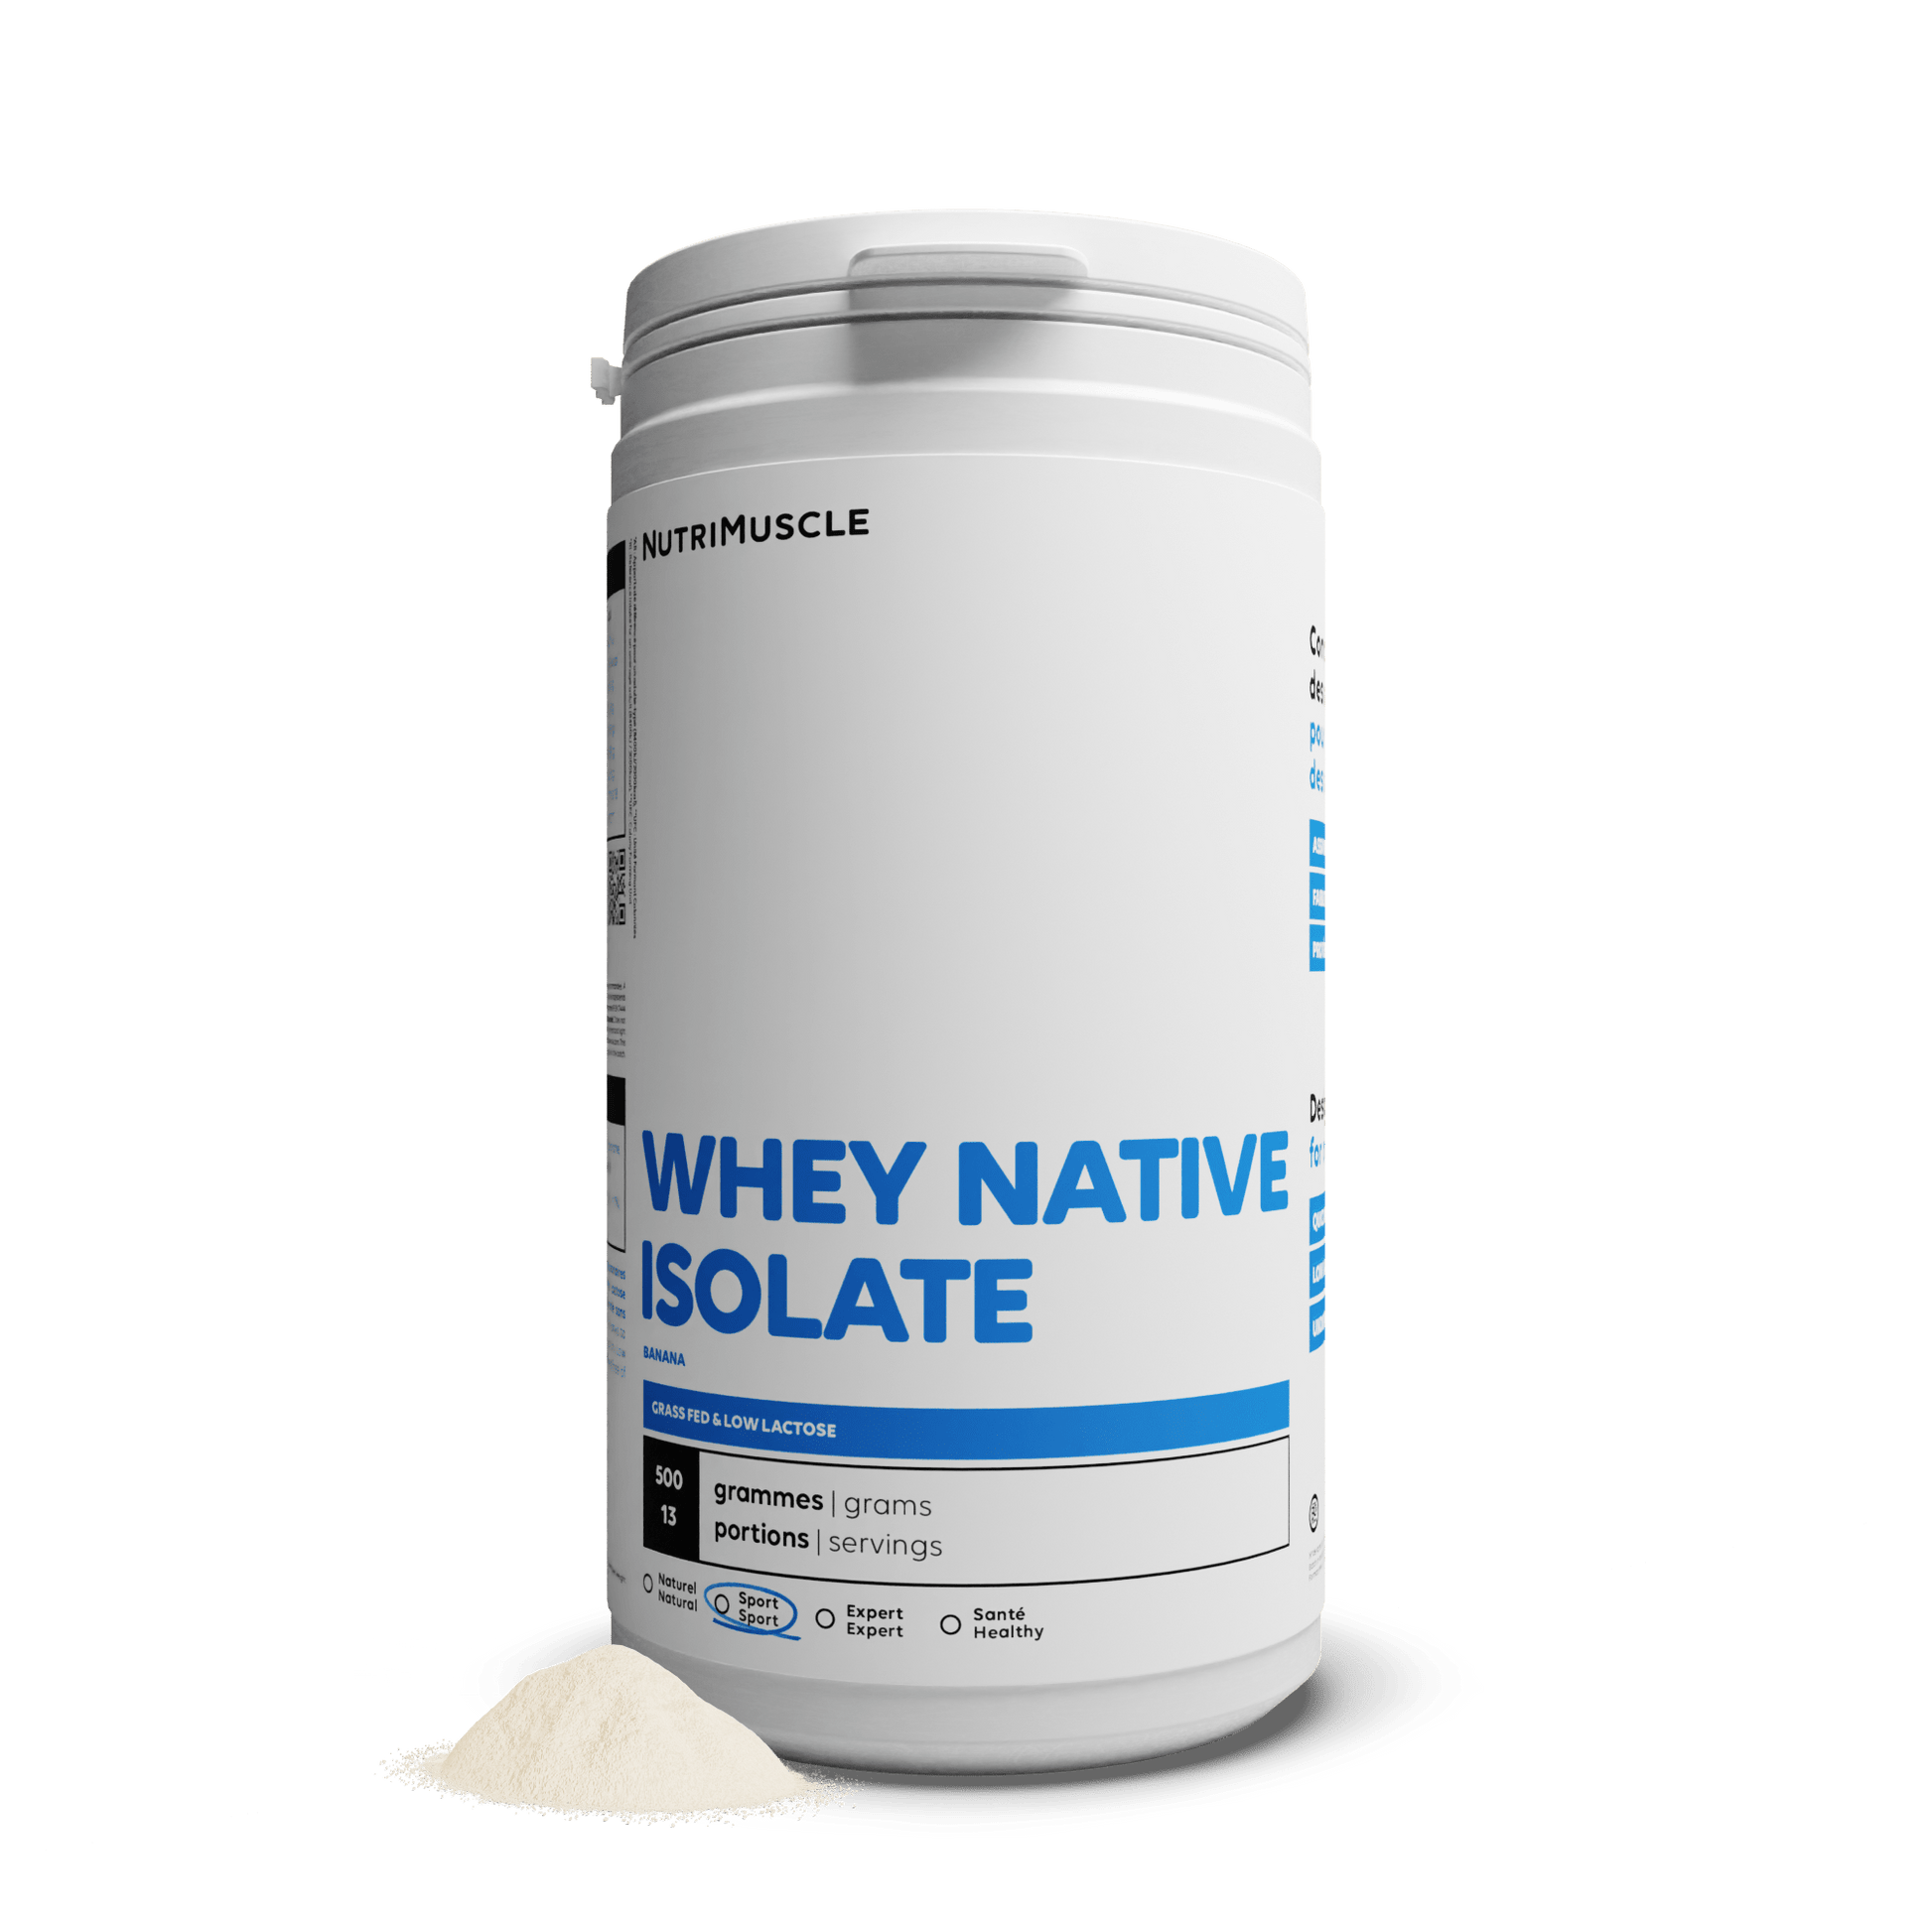 Nutrimuscle Protéines Banane / 500 g Whey Native Isolate (Low lactose)